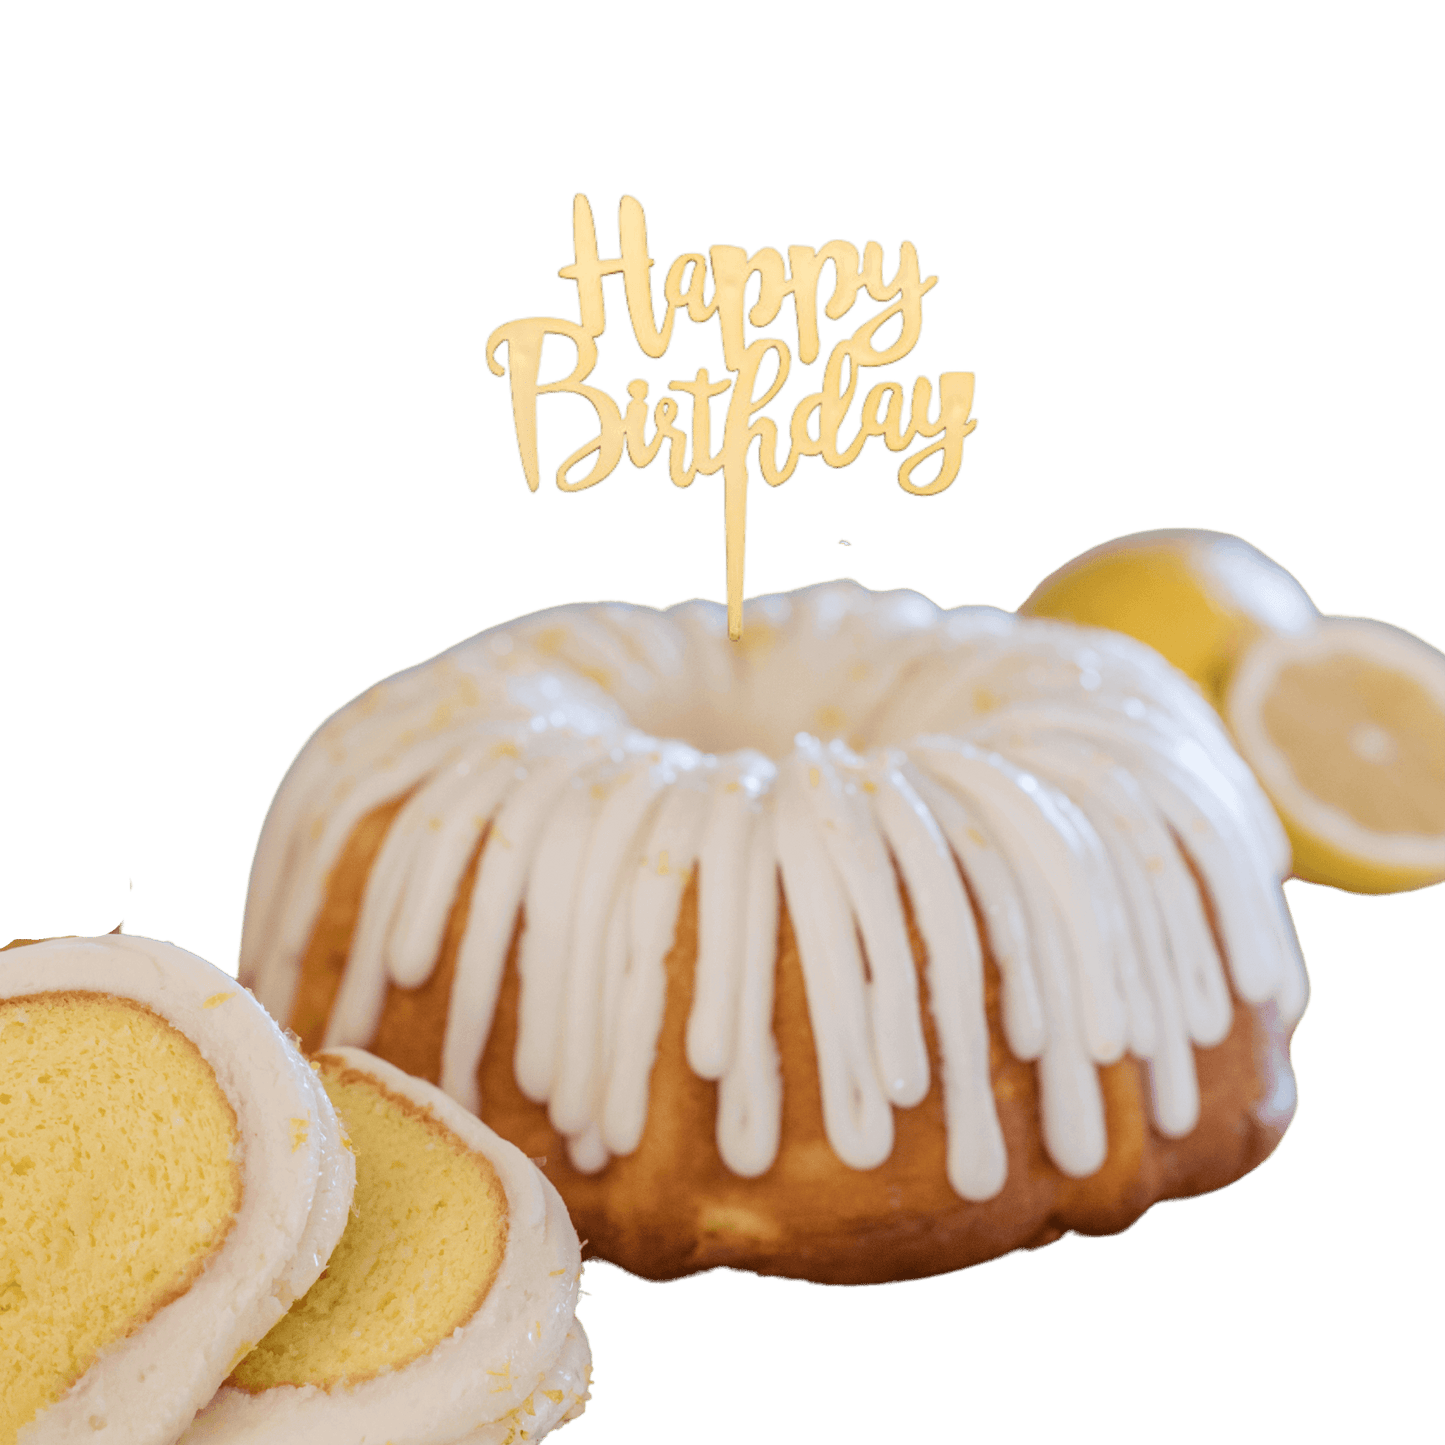 Lemon Squeeze Gold "HAPPY BIRTHDAY" Cake Topper & Candle Holder Bundt Cake - Wholesale Supplies